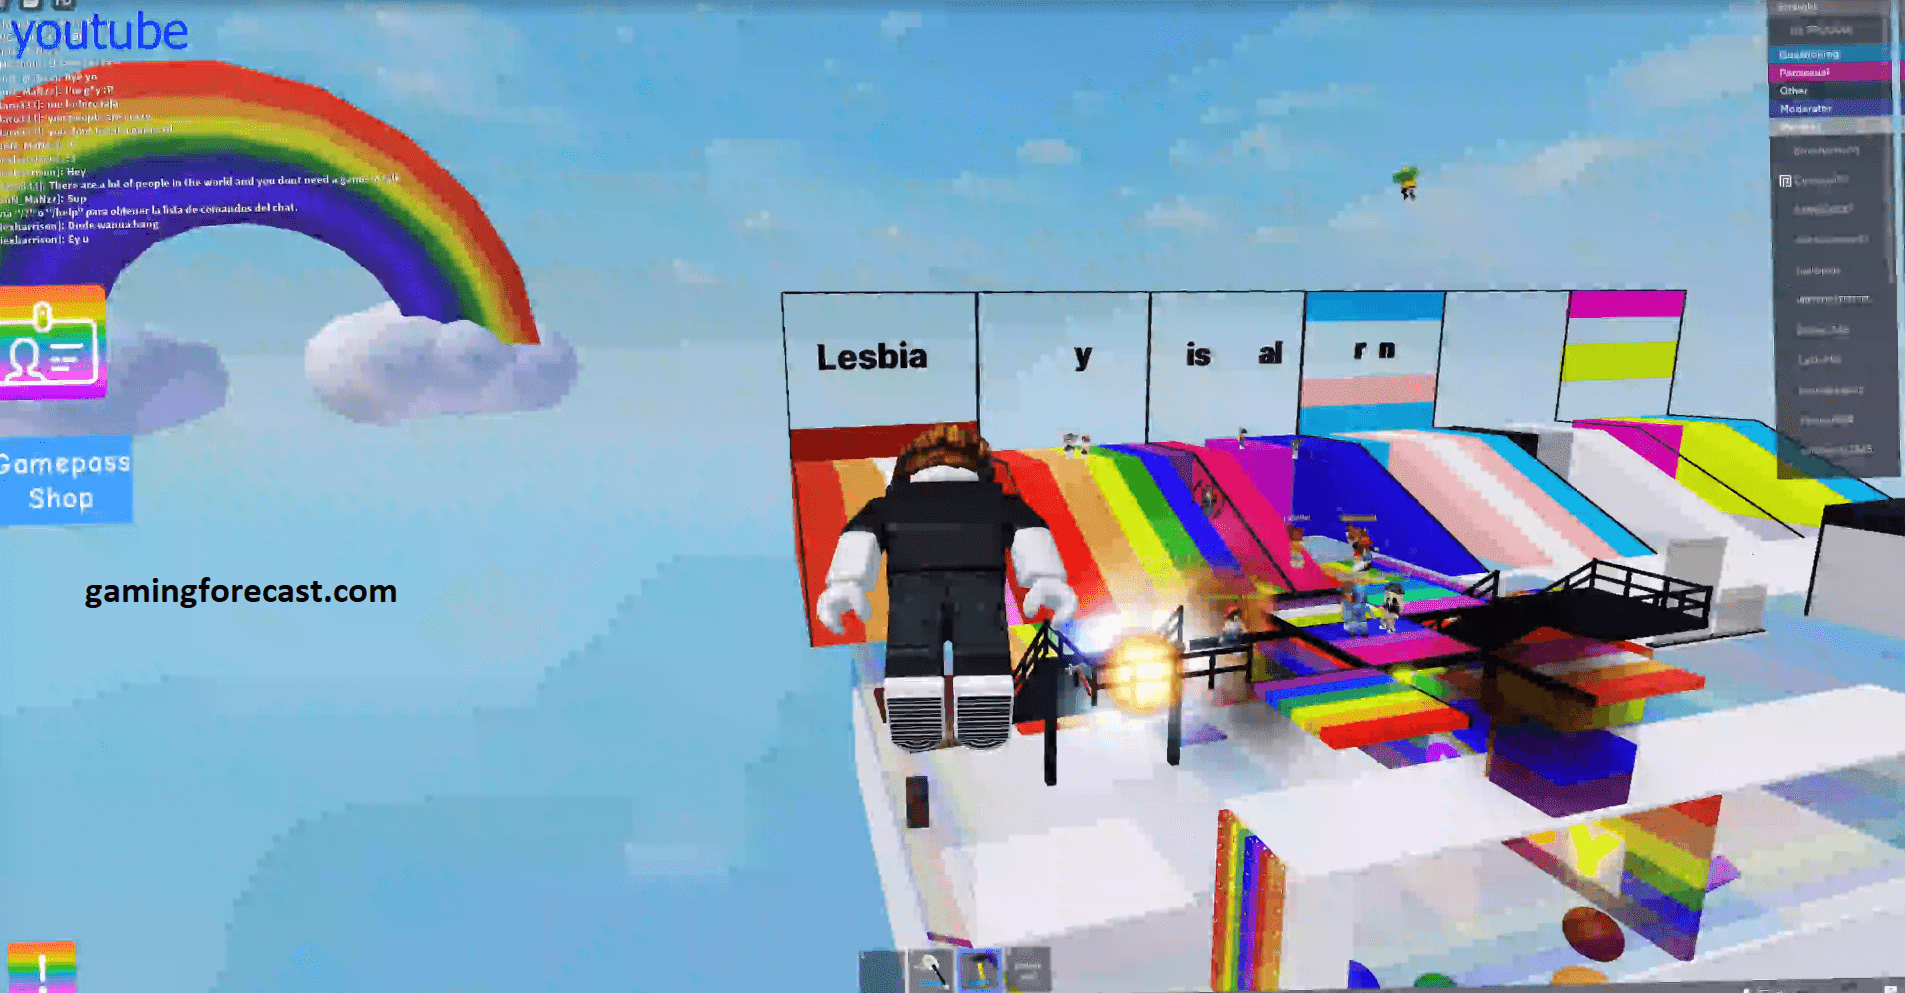 Roblox Hack Download Pc Destroy Lobby Fly Aimbot Scripts 2021 Gaming Forecast Download Free Online Game Hacks - create and destroy roblox